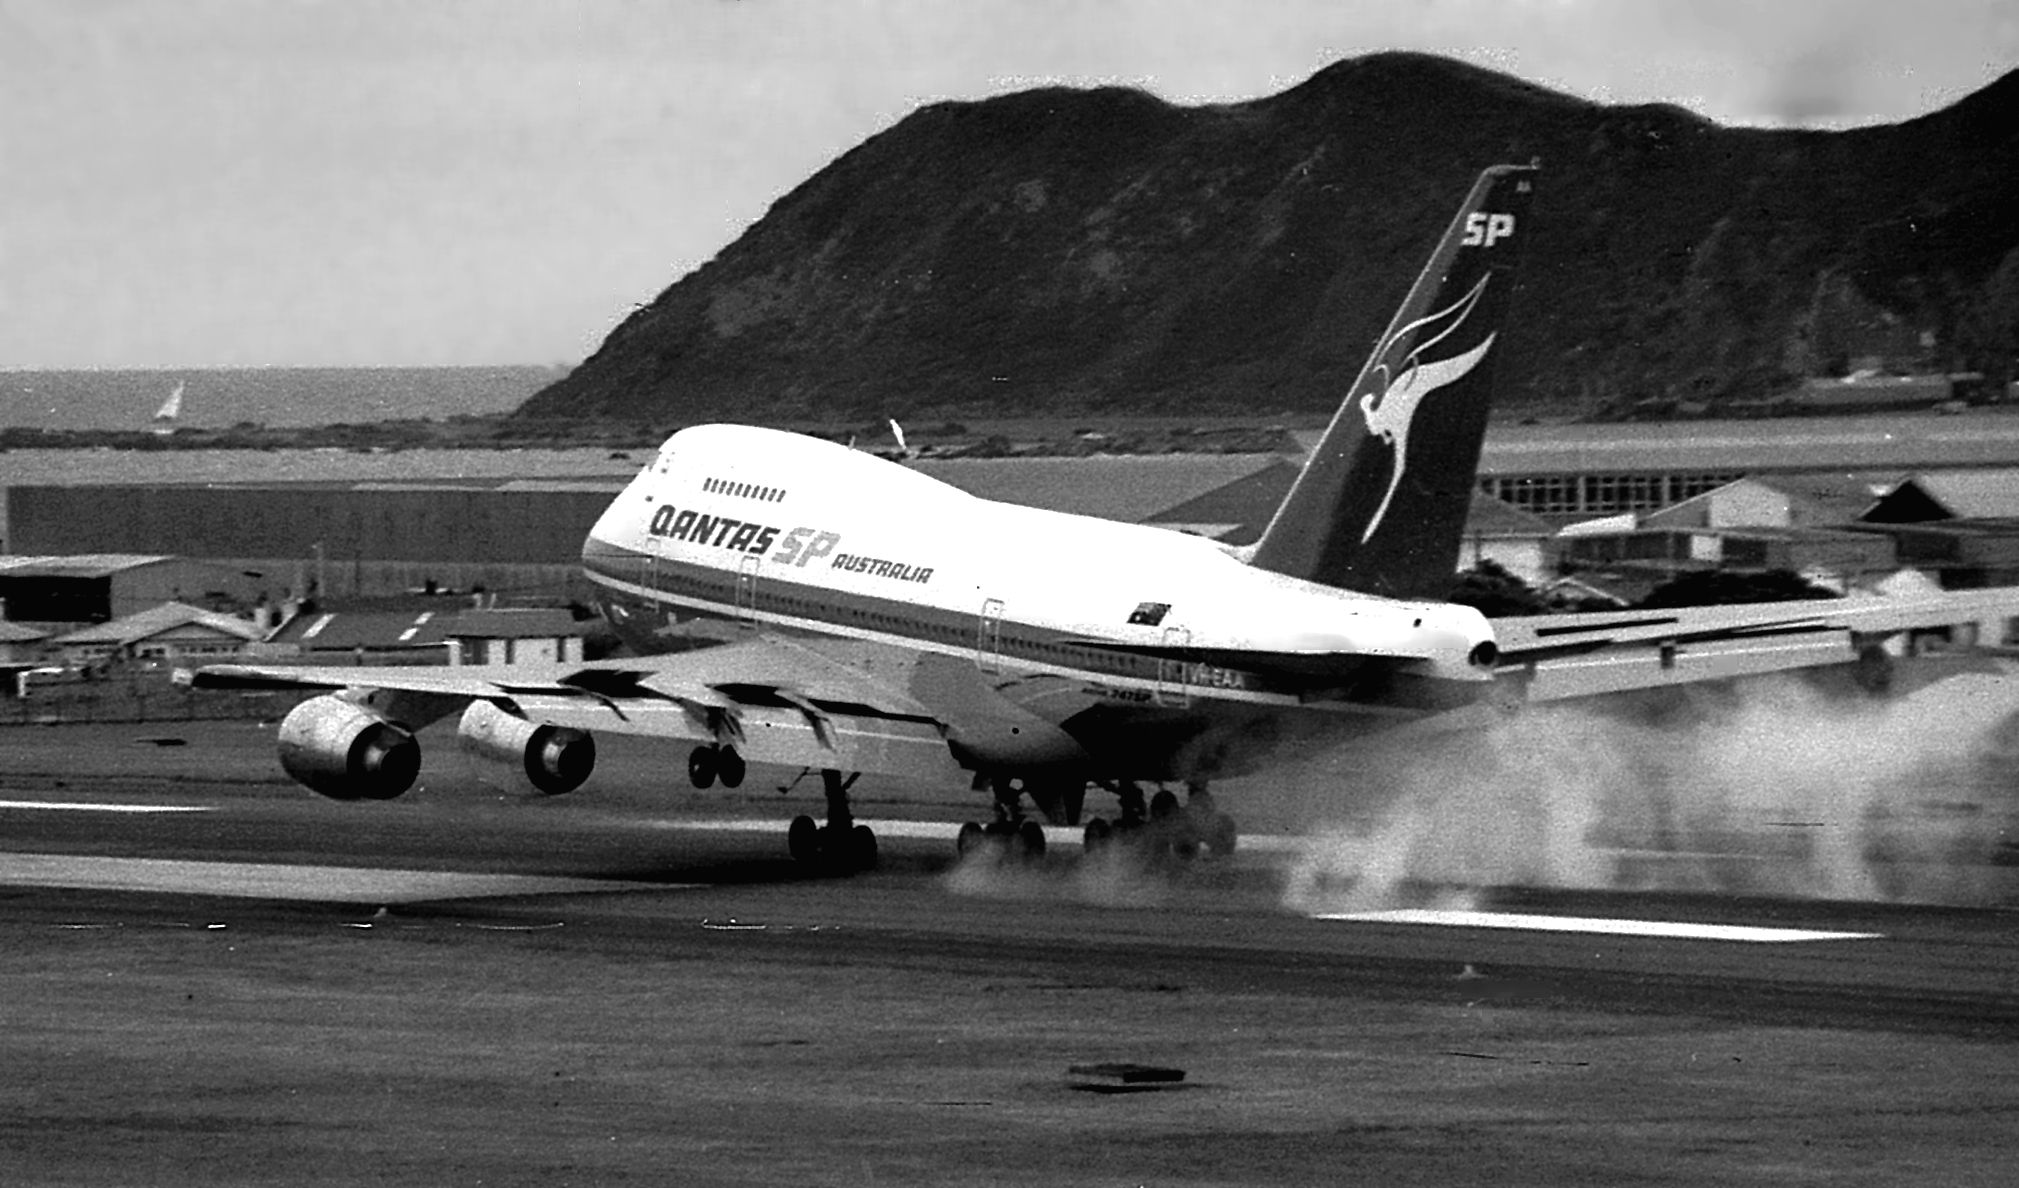 A Qantas Boeing 747SP just after landing on a runway.